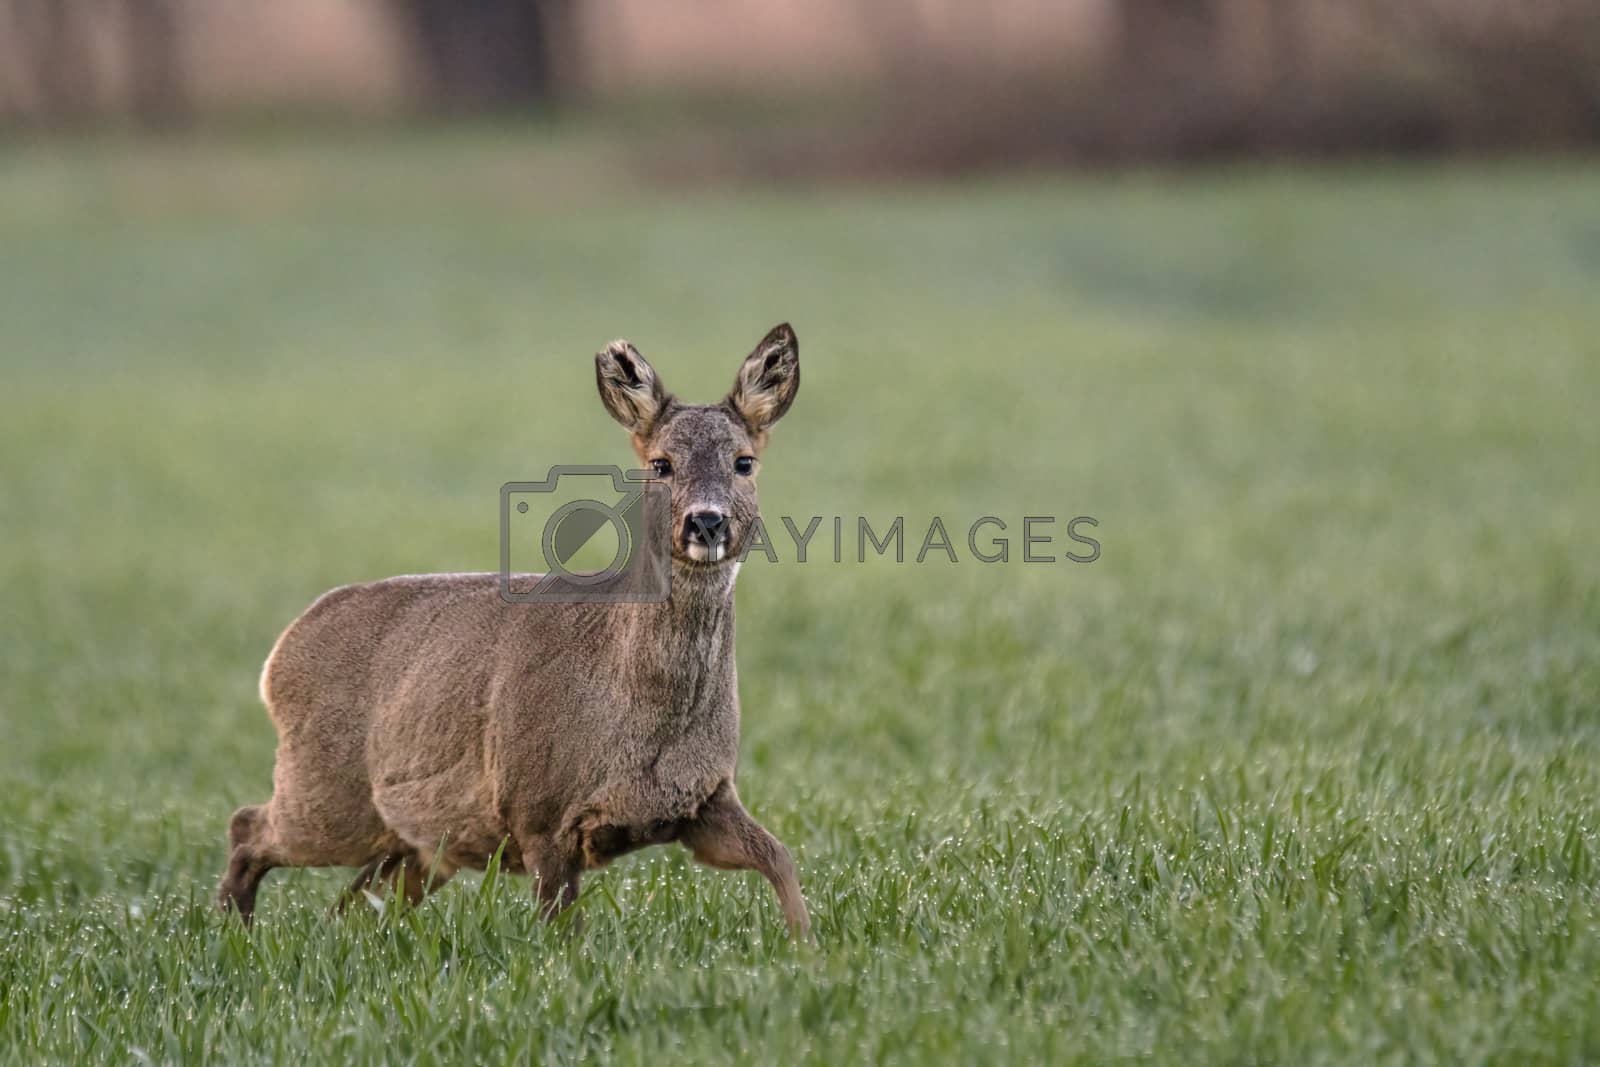 Royalty free image of roe deer at field in the wild nature by mario_plechaty_photography